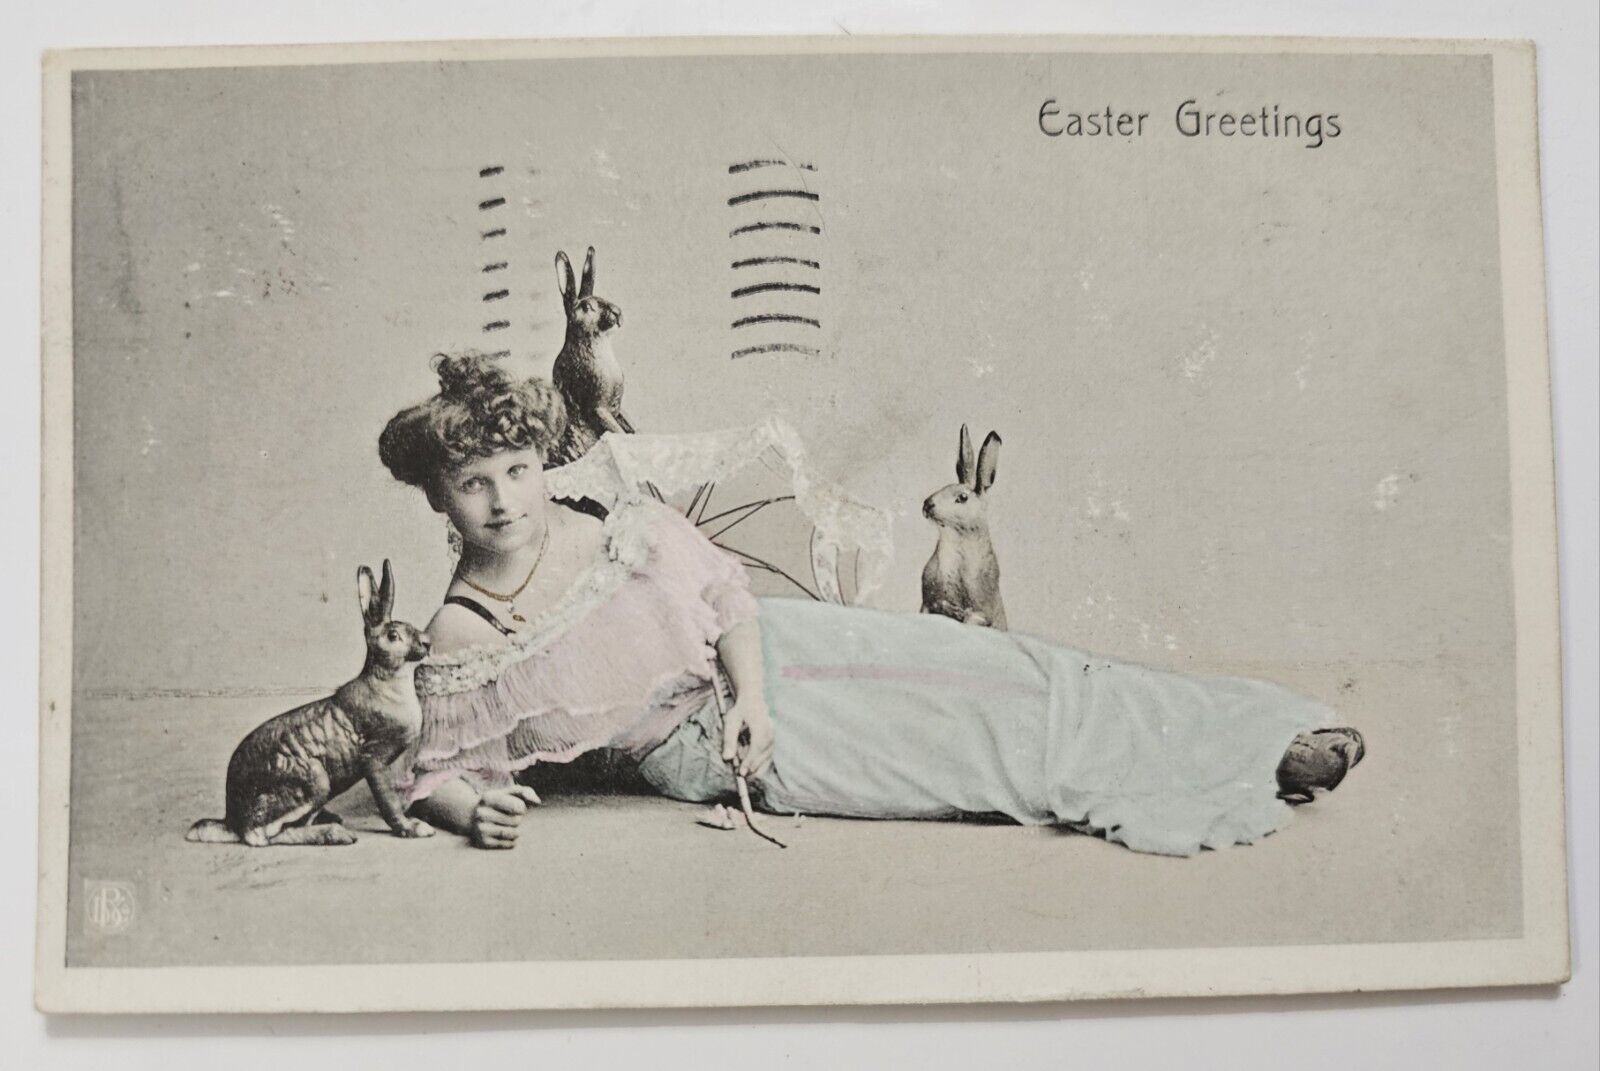 1909 EASTER Greetings Postcard Lady With Bunny Rabbits #1